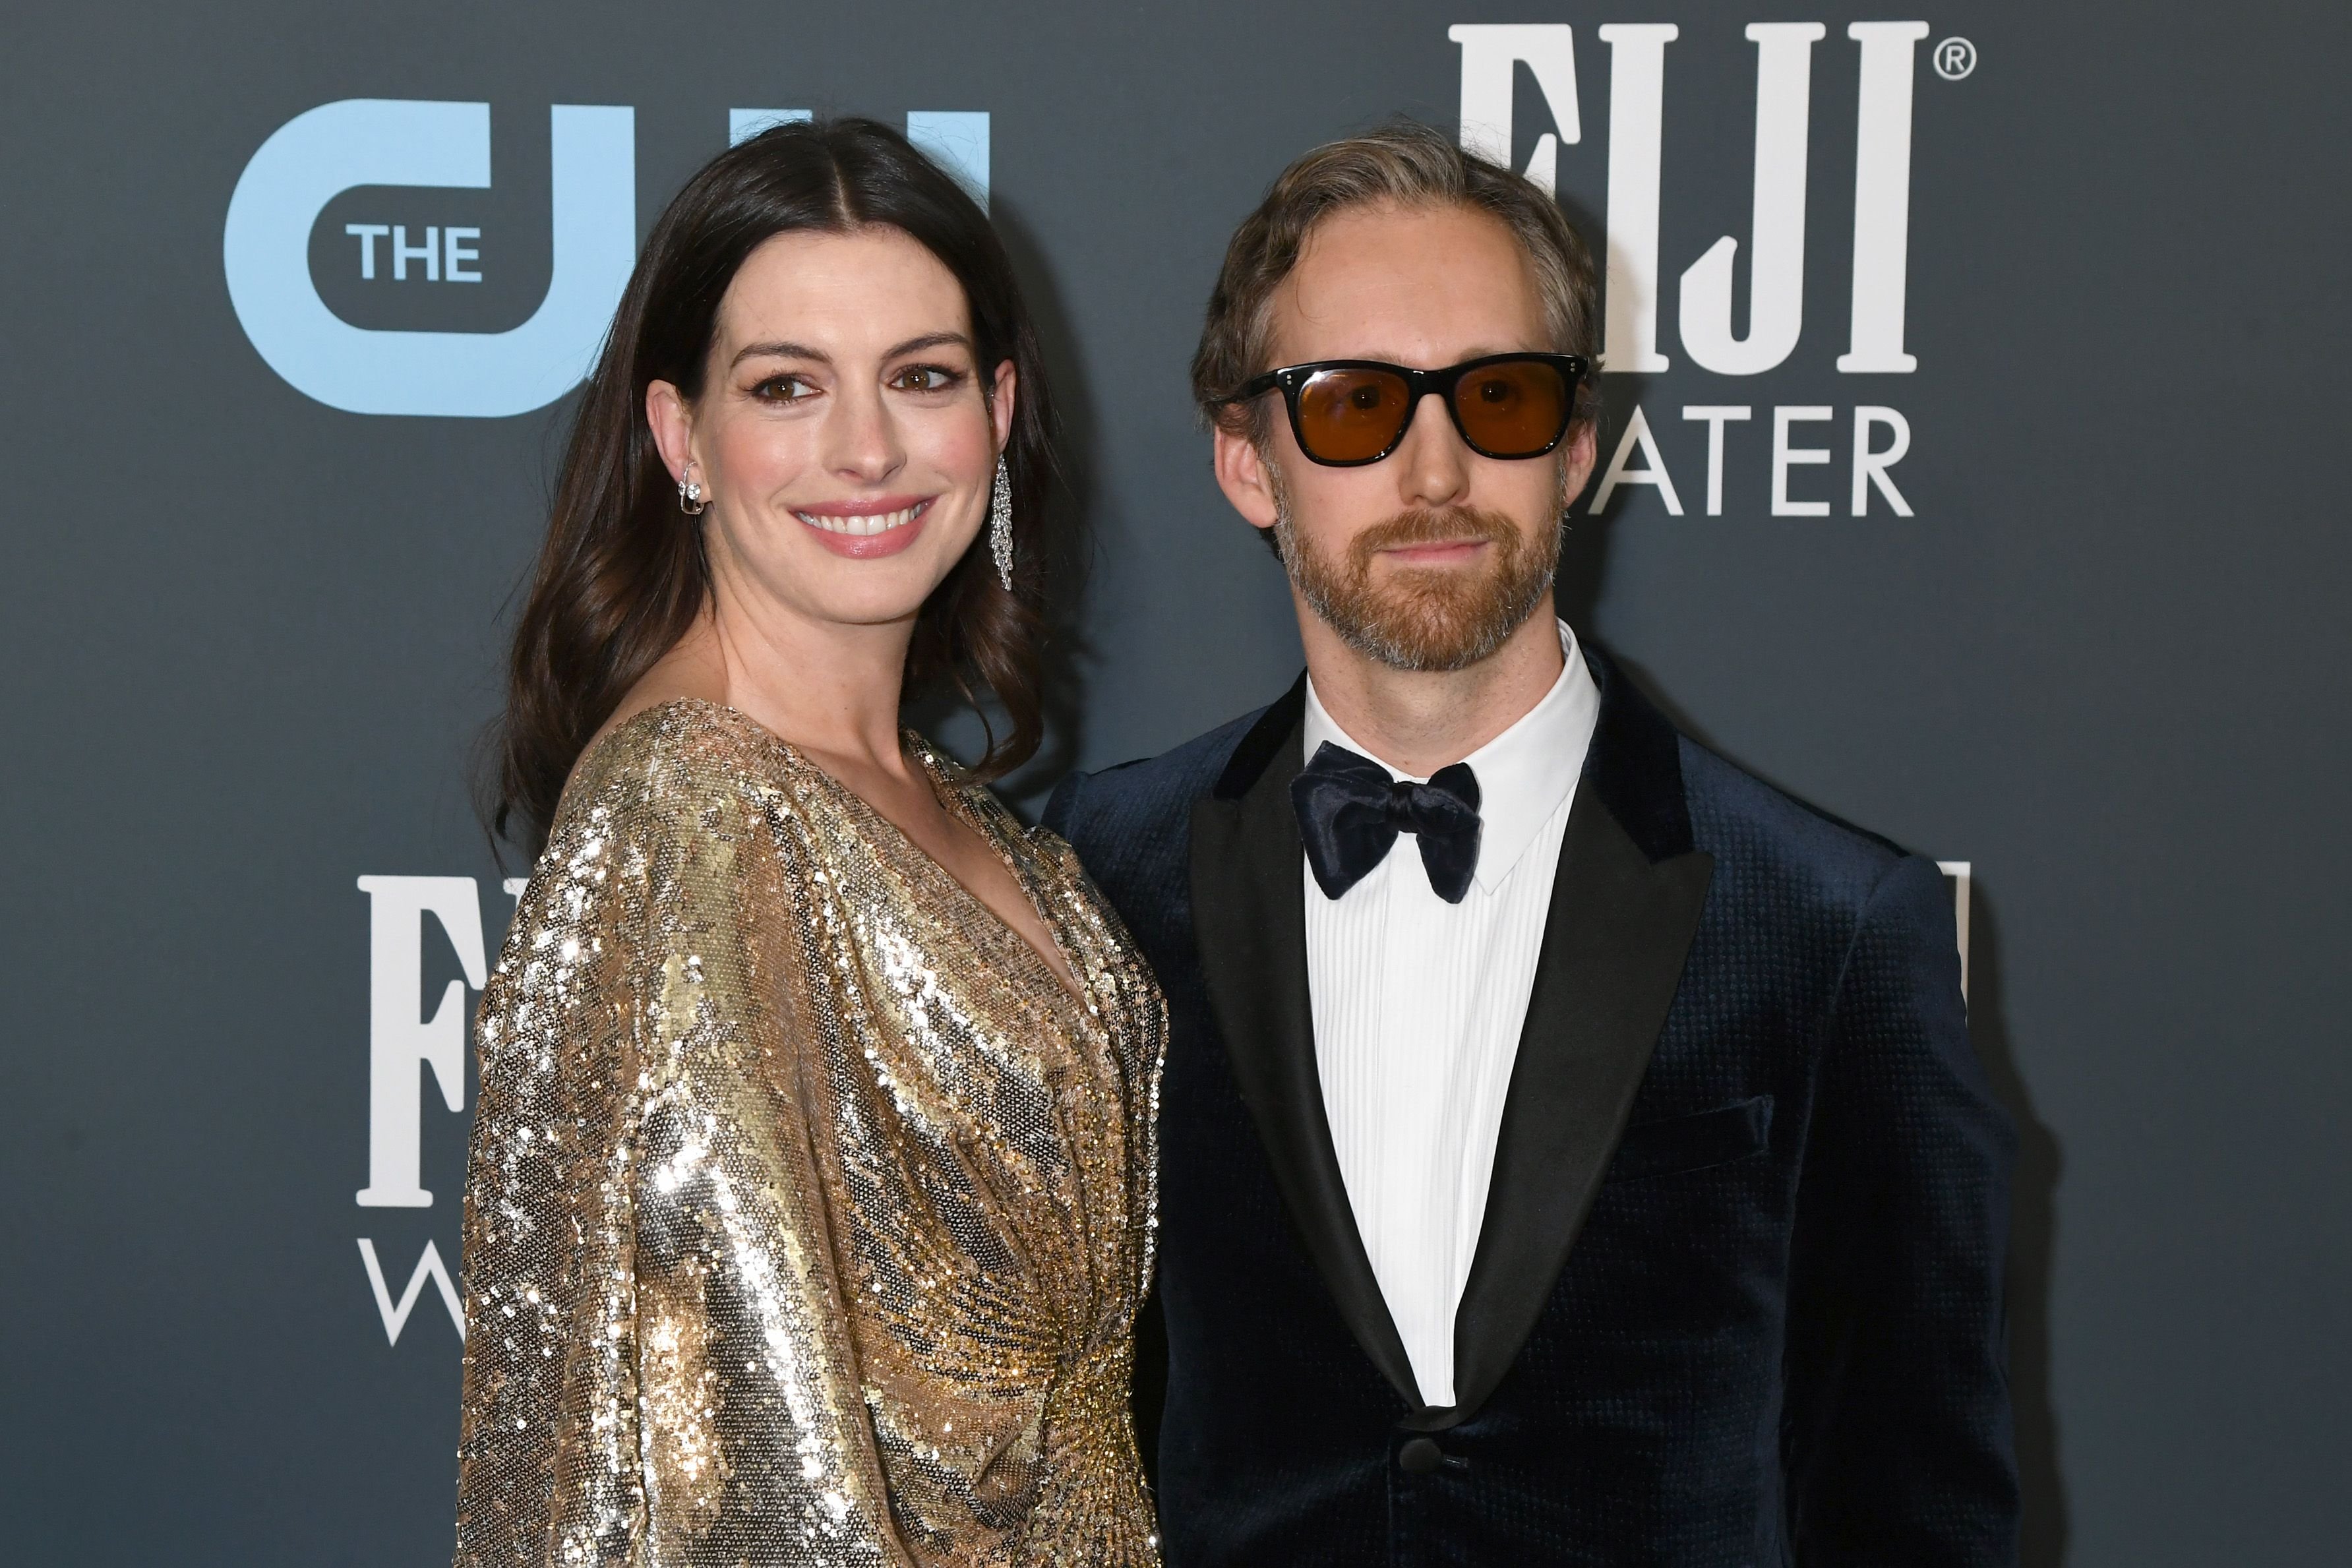 Anne Hathaway and Adam Shulman at the 25th Annual Critics' Choice Awards in January 2020 in Santa Monica | Source: Getty Images